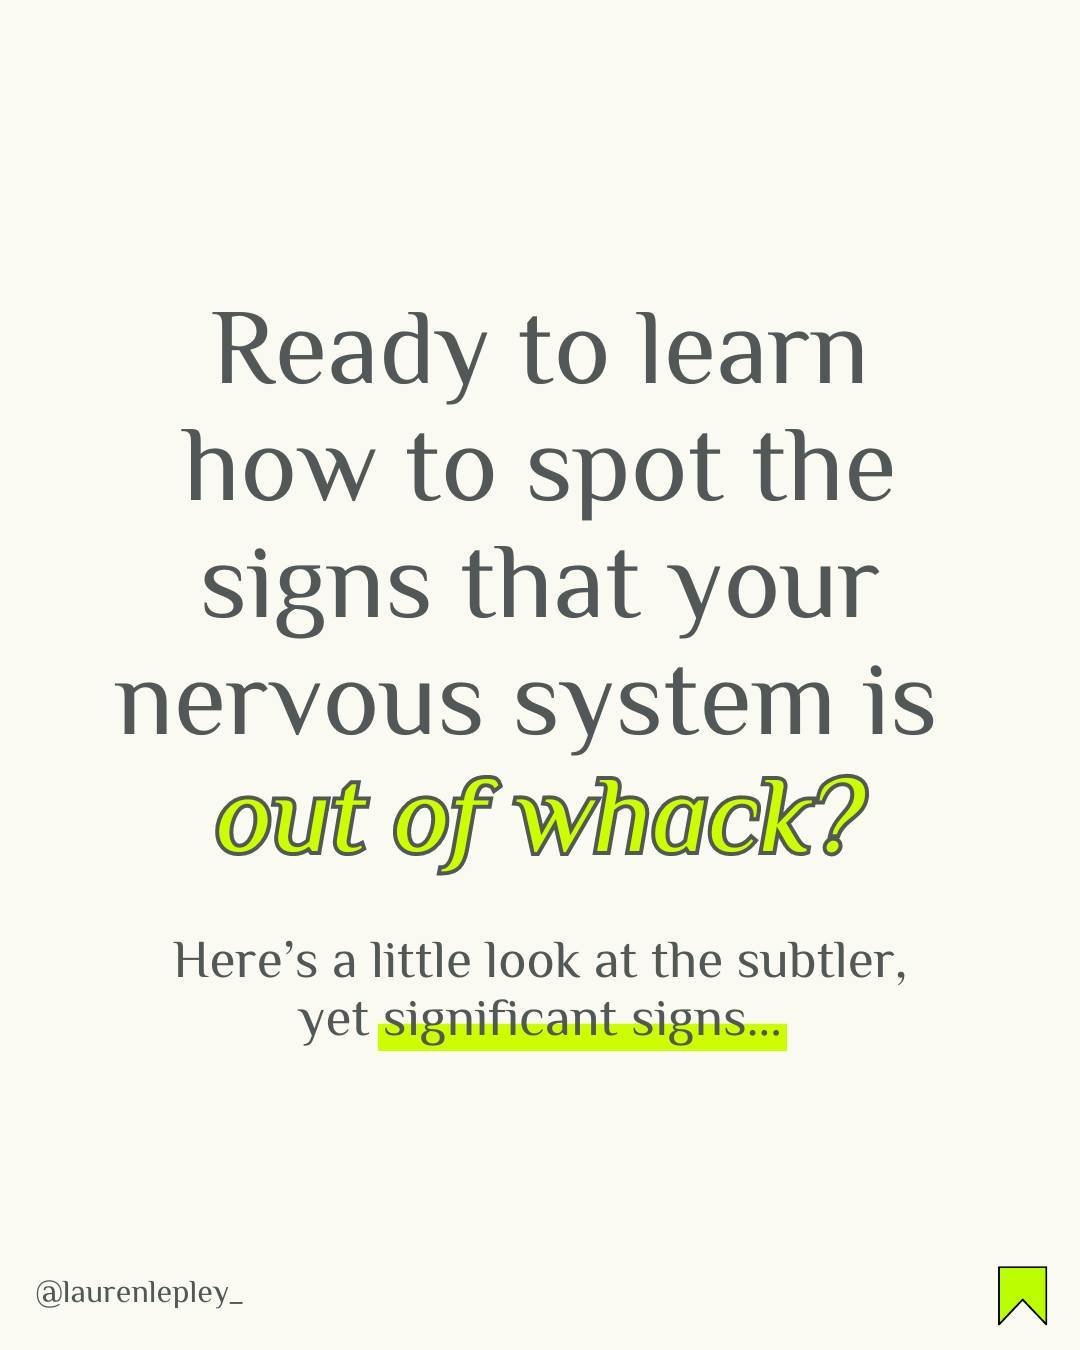 Ready to learn how to spot the signs that your nervous system is out of whack?

Navigating high-stakes environments can put constant pressure on your nervous system. Here&rsquo;s a look at the subtler signs that might indicate your nervous system is 